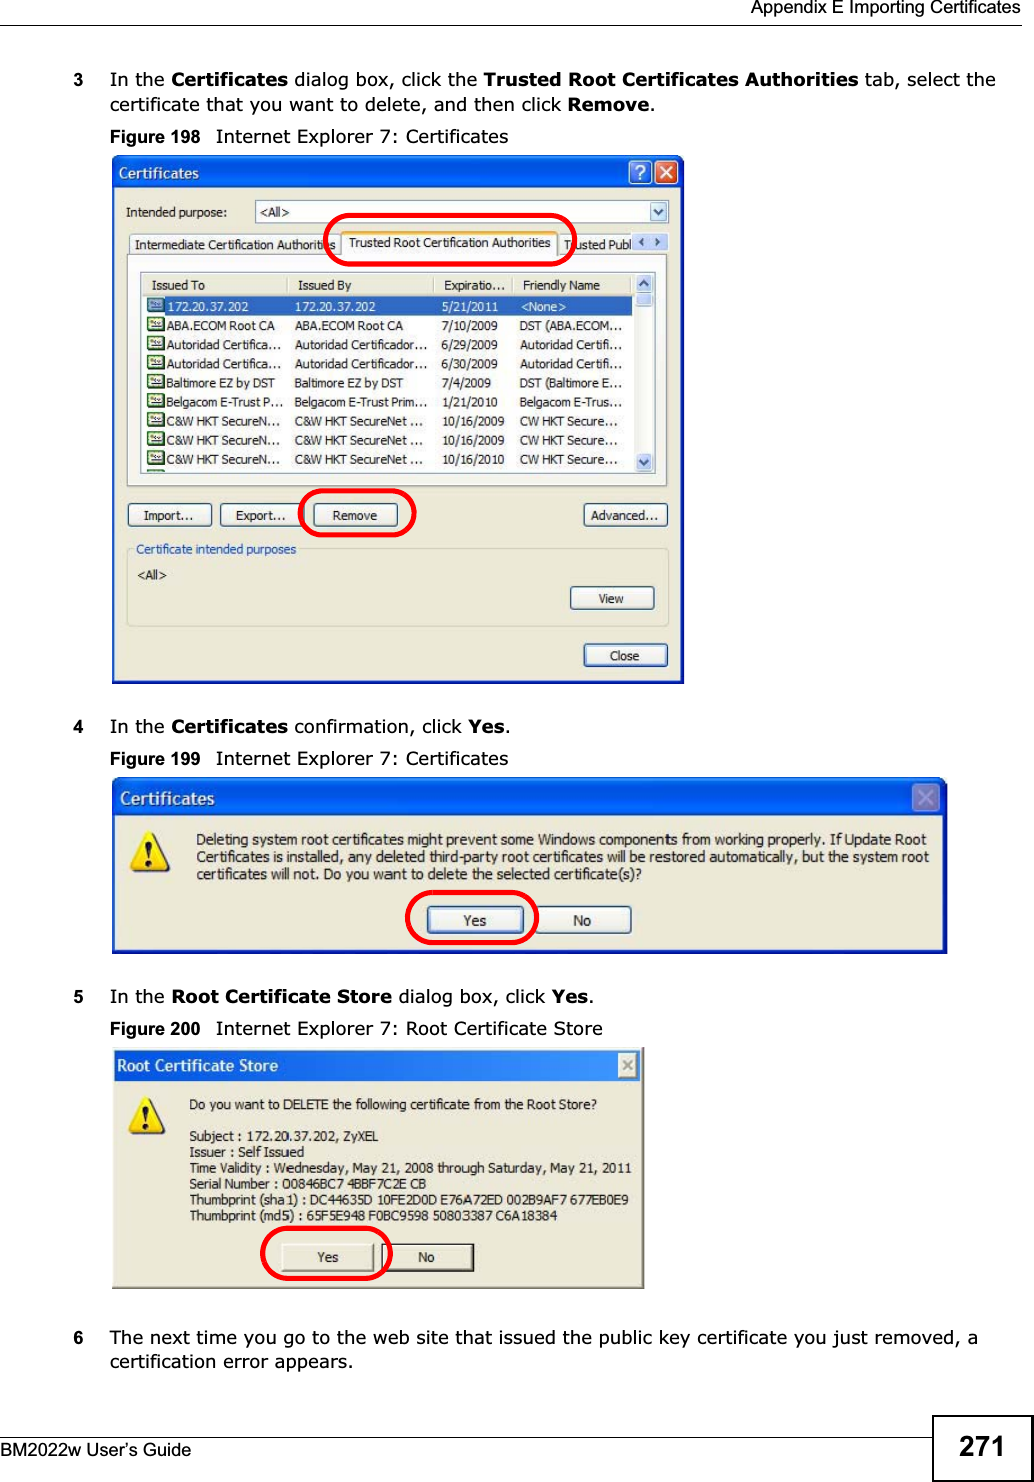  Appendix E Importing CertificatesBM2022w User’s Guide 2713In the Certificates dialog box, click the Trusted Root Certificates Authorities tab, select the certificate that you want to delete, and then click Remove.Figure 198   Internet Explorer 7: Certificates4In the Certificates confirmation, click Yes.Figure 199   Internet Explorer 7: Certificates5In the Root Certificate Store dialog box, click Yes.Figure 200   Internet Explorer 7: Root Certificate Store6The next time you go to the web site that issued the public key certificate you just removed, a certification error appears.